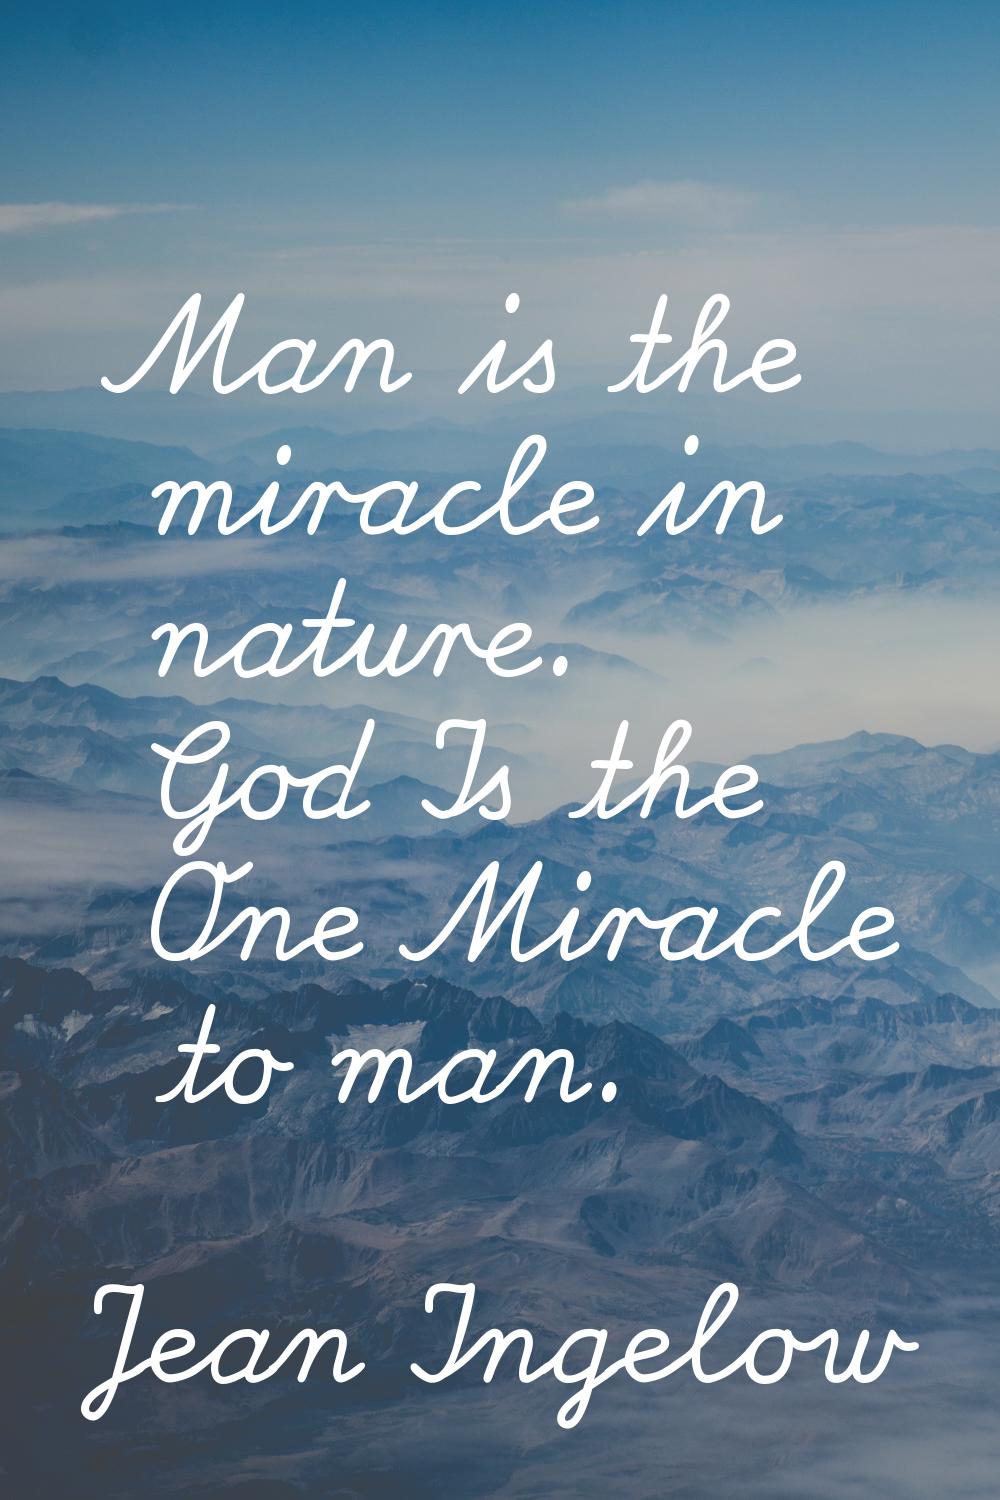 Man is the miracle in nature. God Is the One Miracle to man.